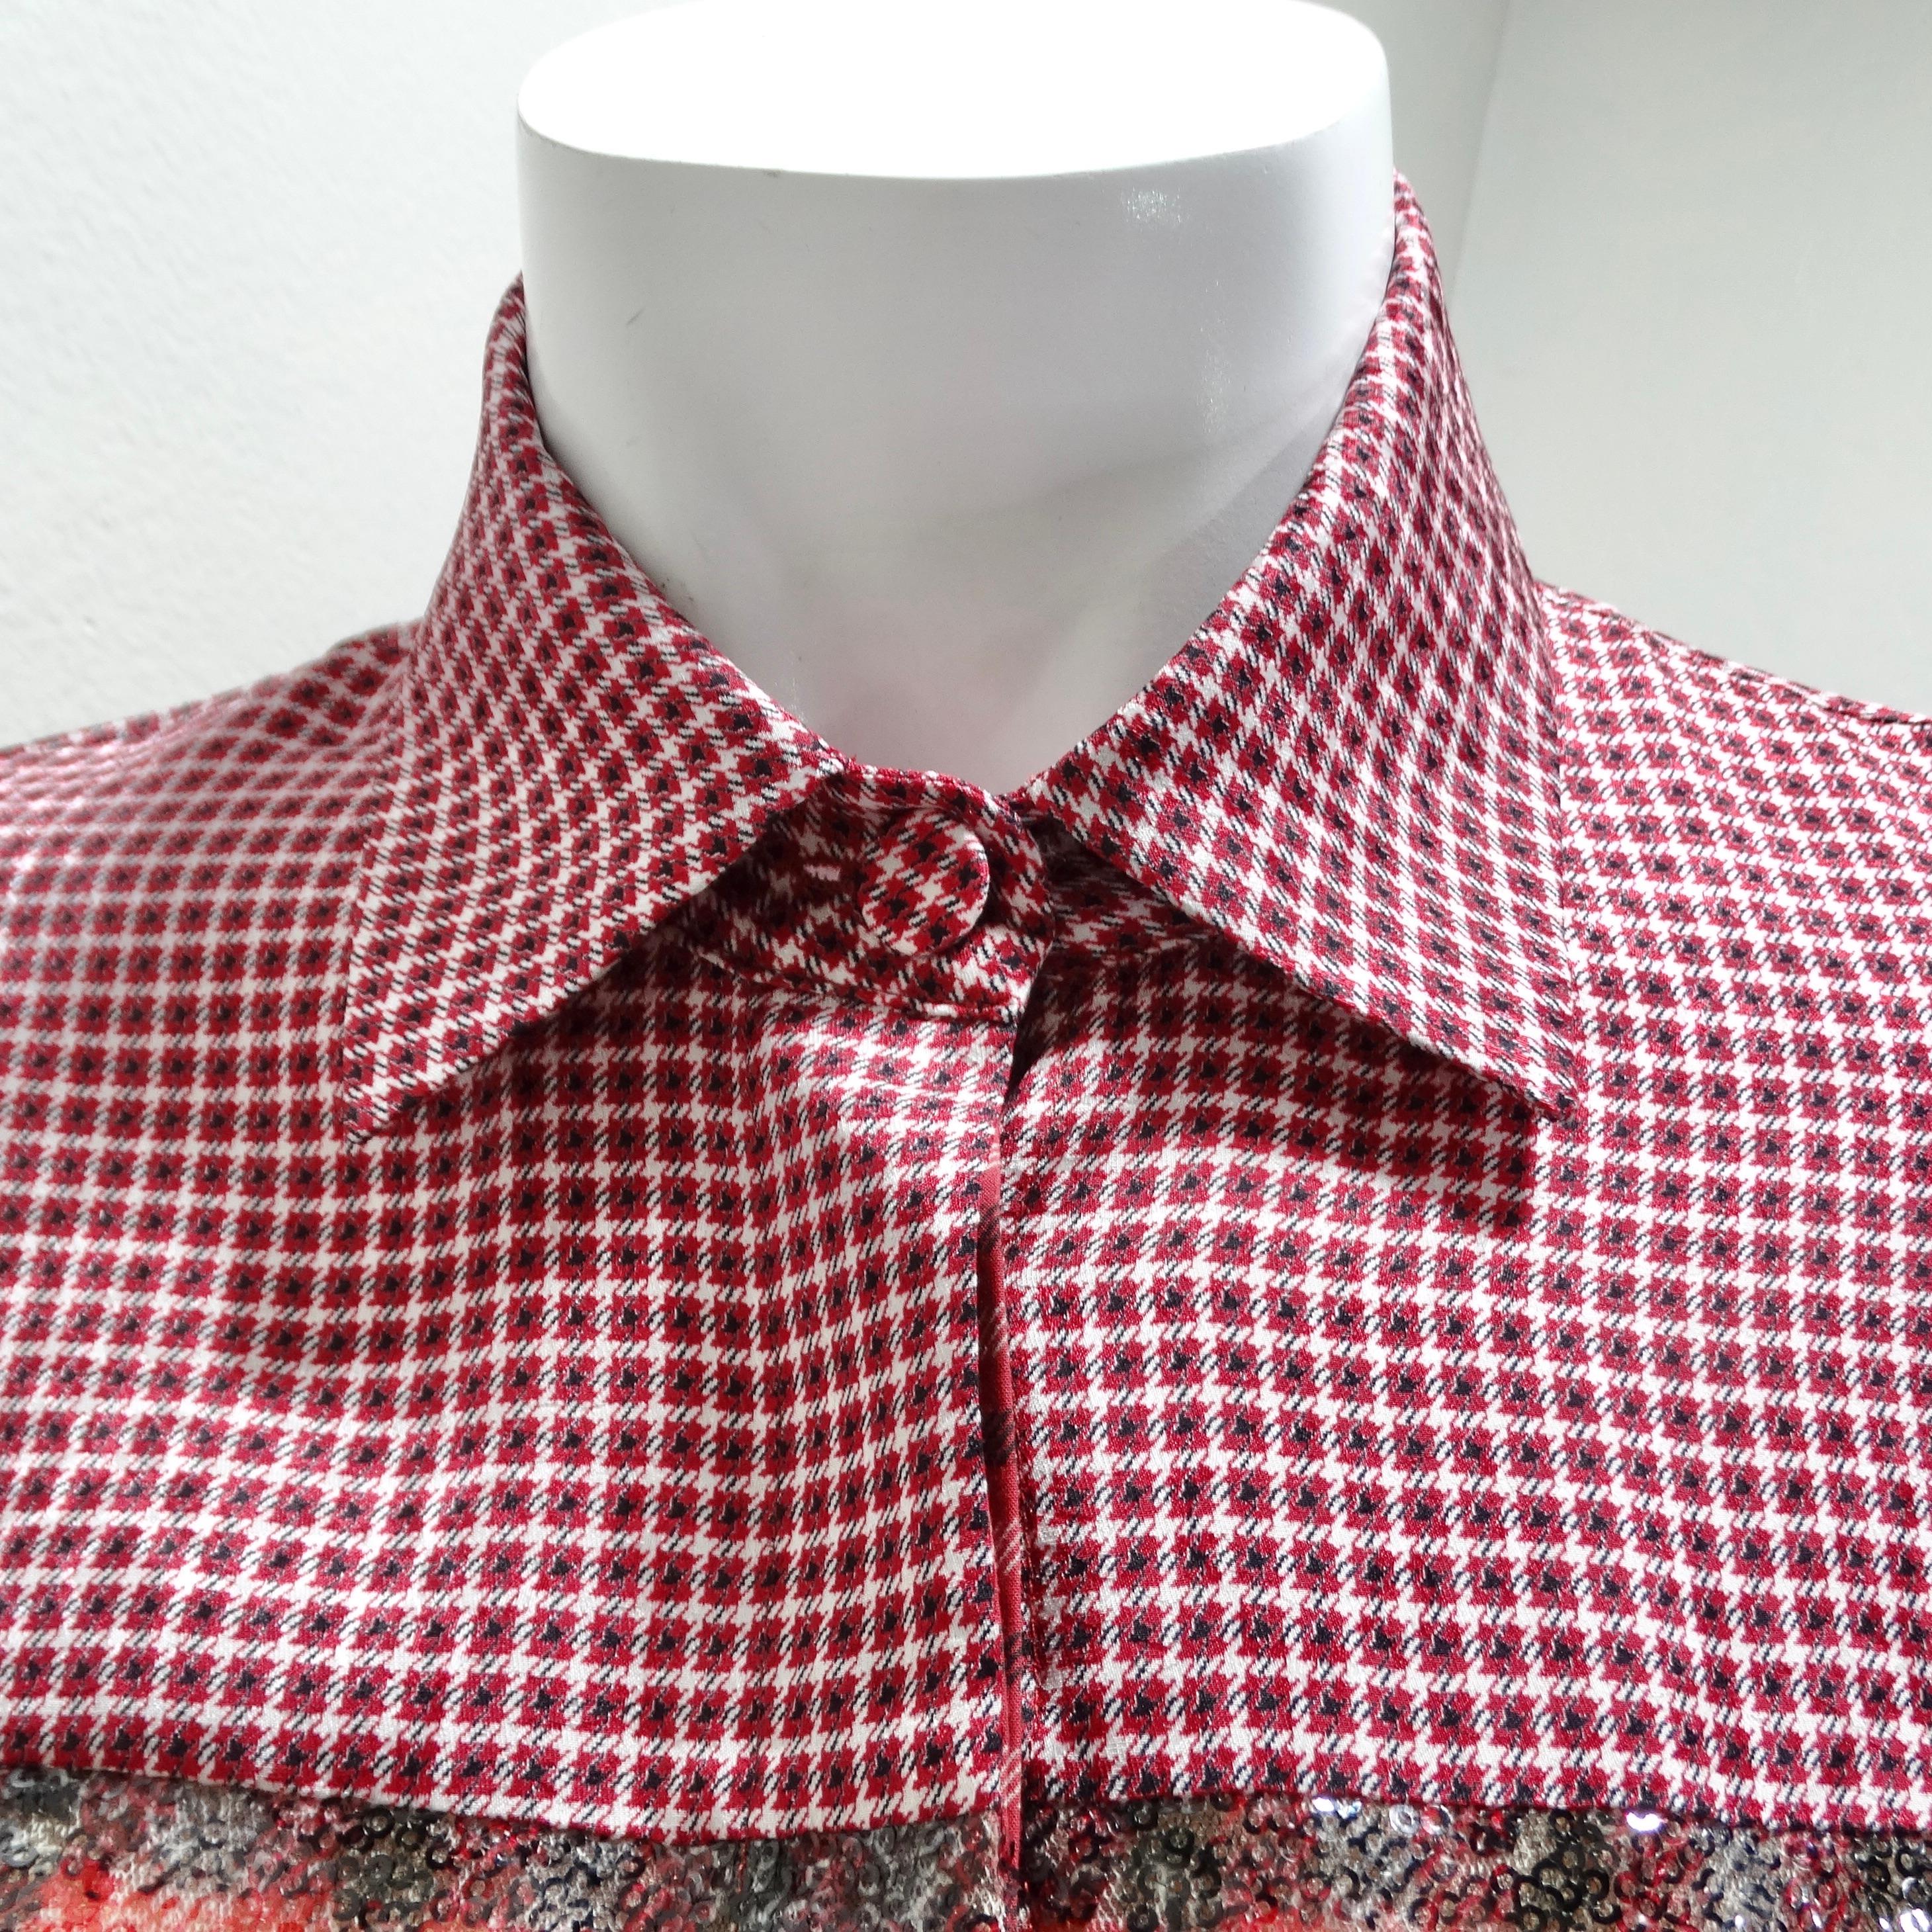 Introducing the Fendi Red Plaid Sequin Button-Up Shirt—a fun and stylish twist on the classic flannel that seamlessly combines vibrant prints with glamorous sequin detailing. This shirt isn't just an article of clothing; it's a wearable work of art